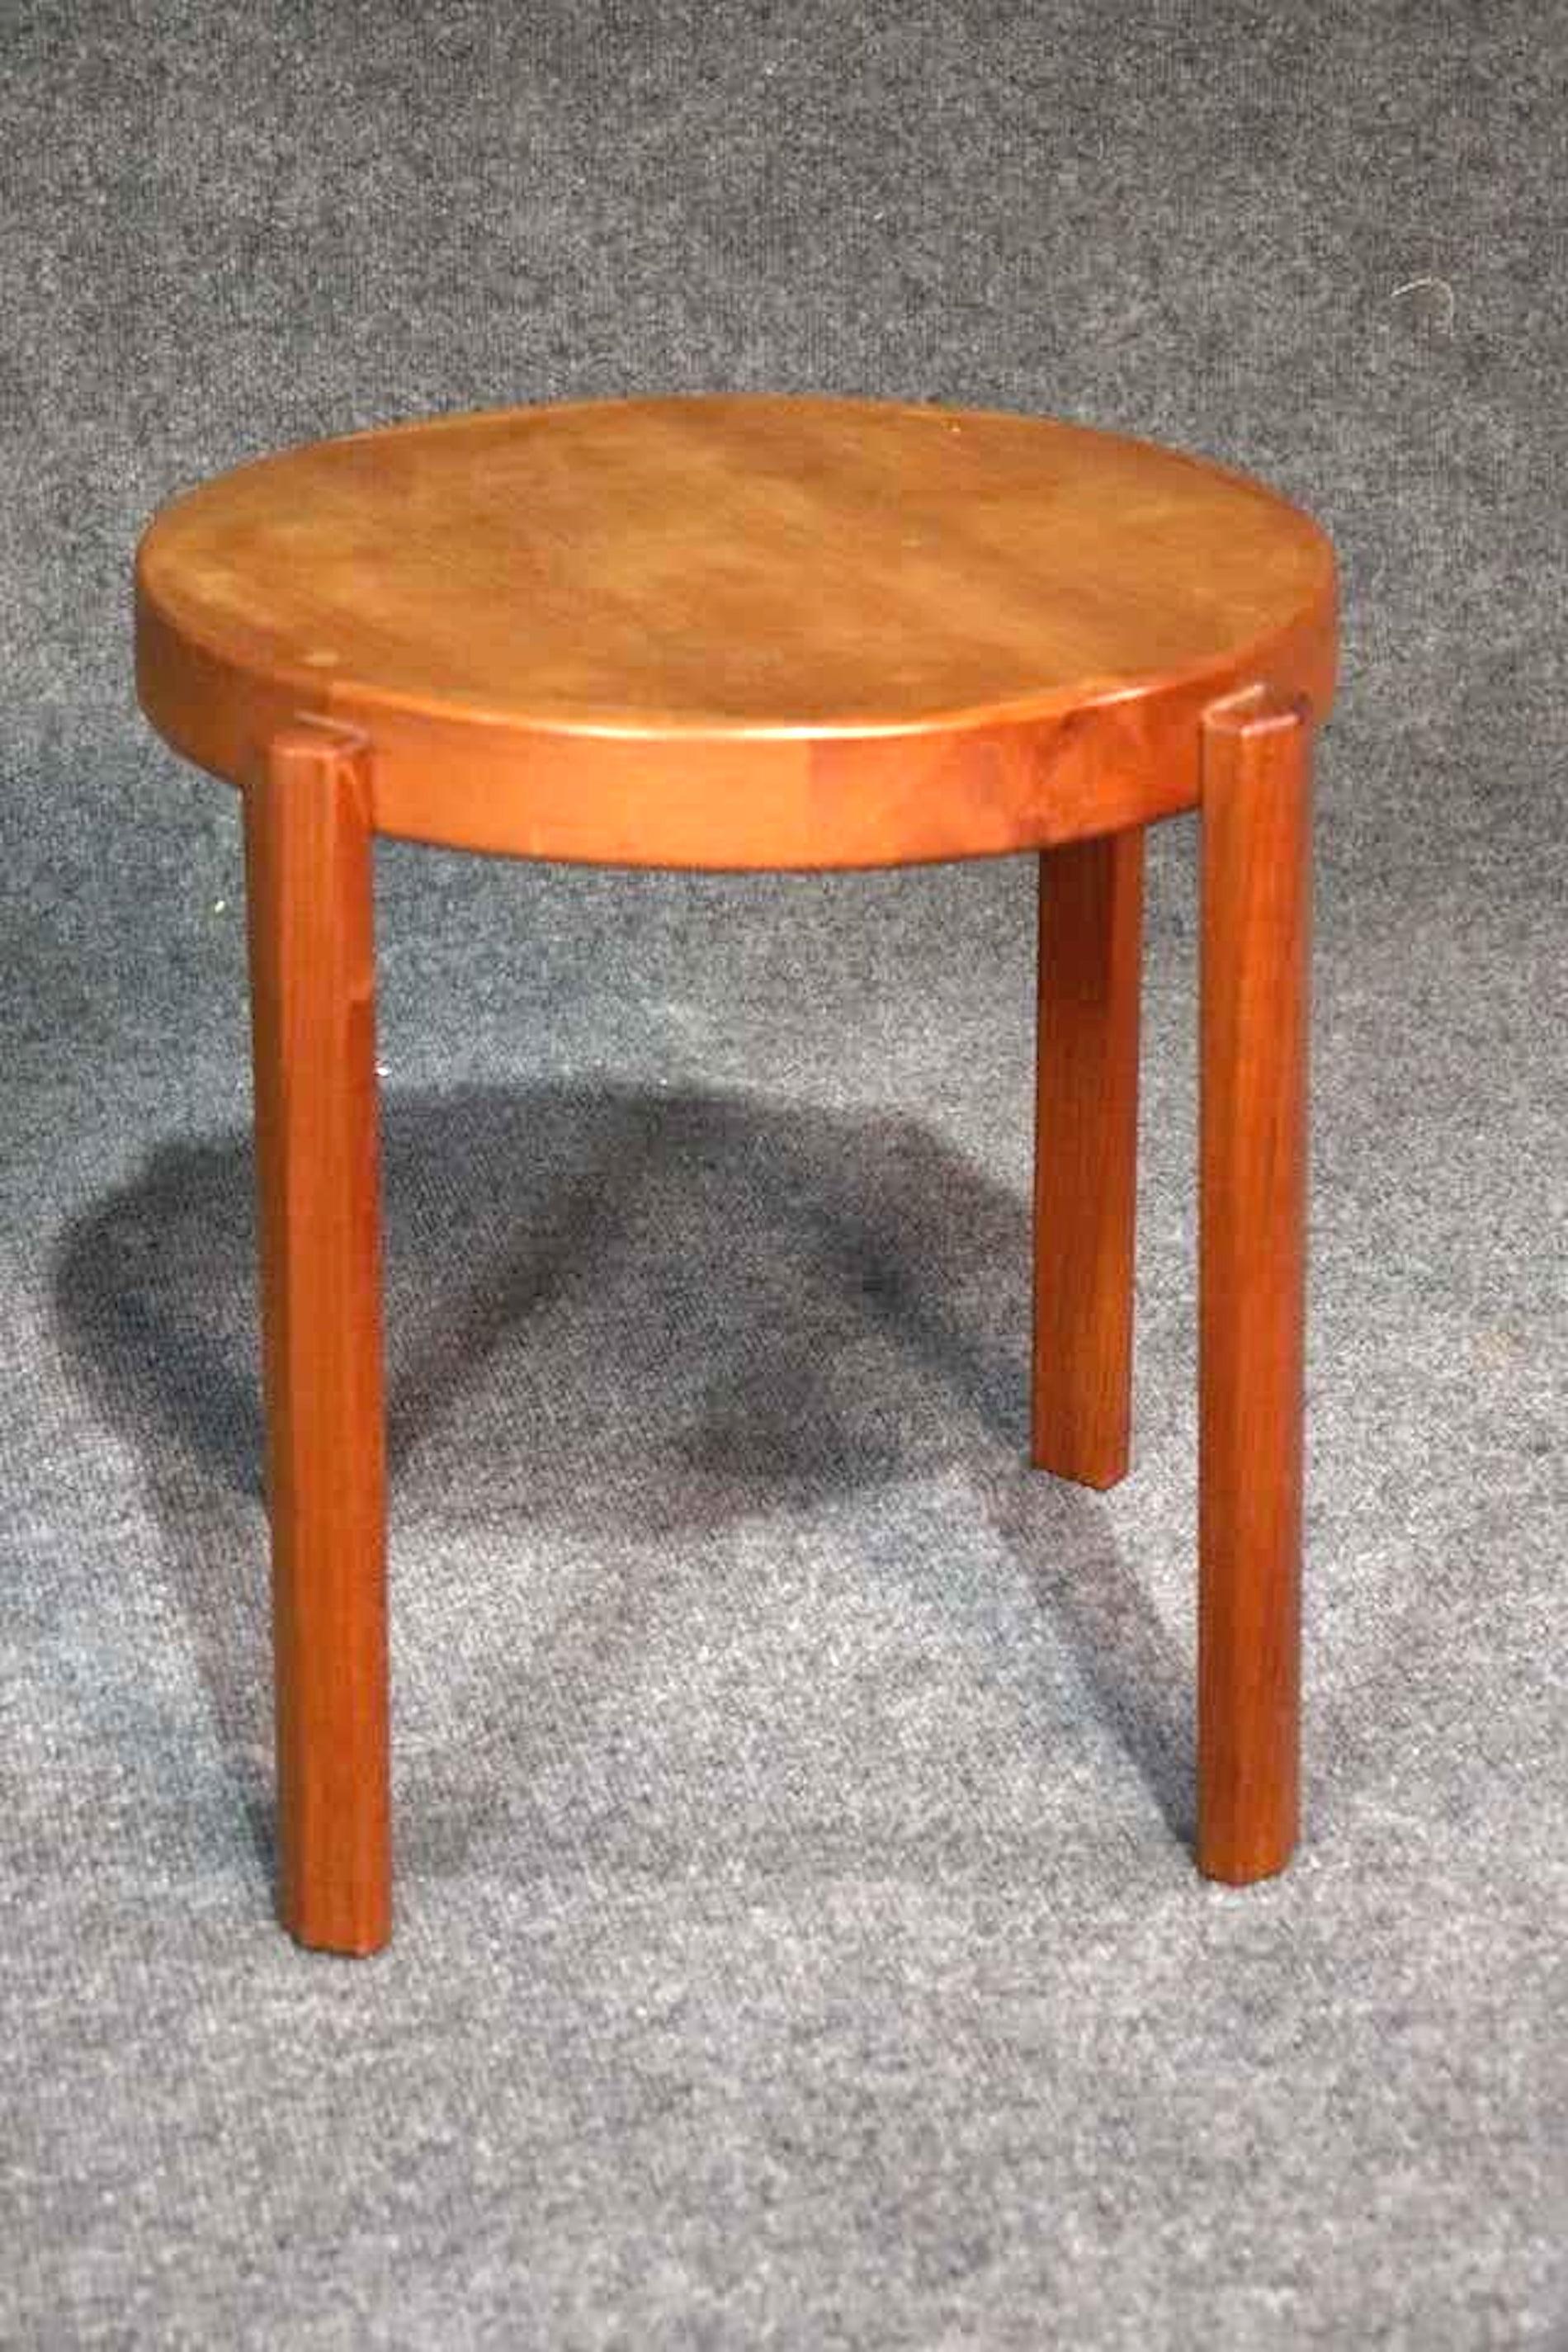 Mid-Century Modern Danish tables factory stamped. Warm teak grain, stackable side tables.
(Please confirm item location - NY or NJ - with dealer).
 